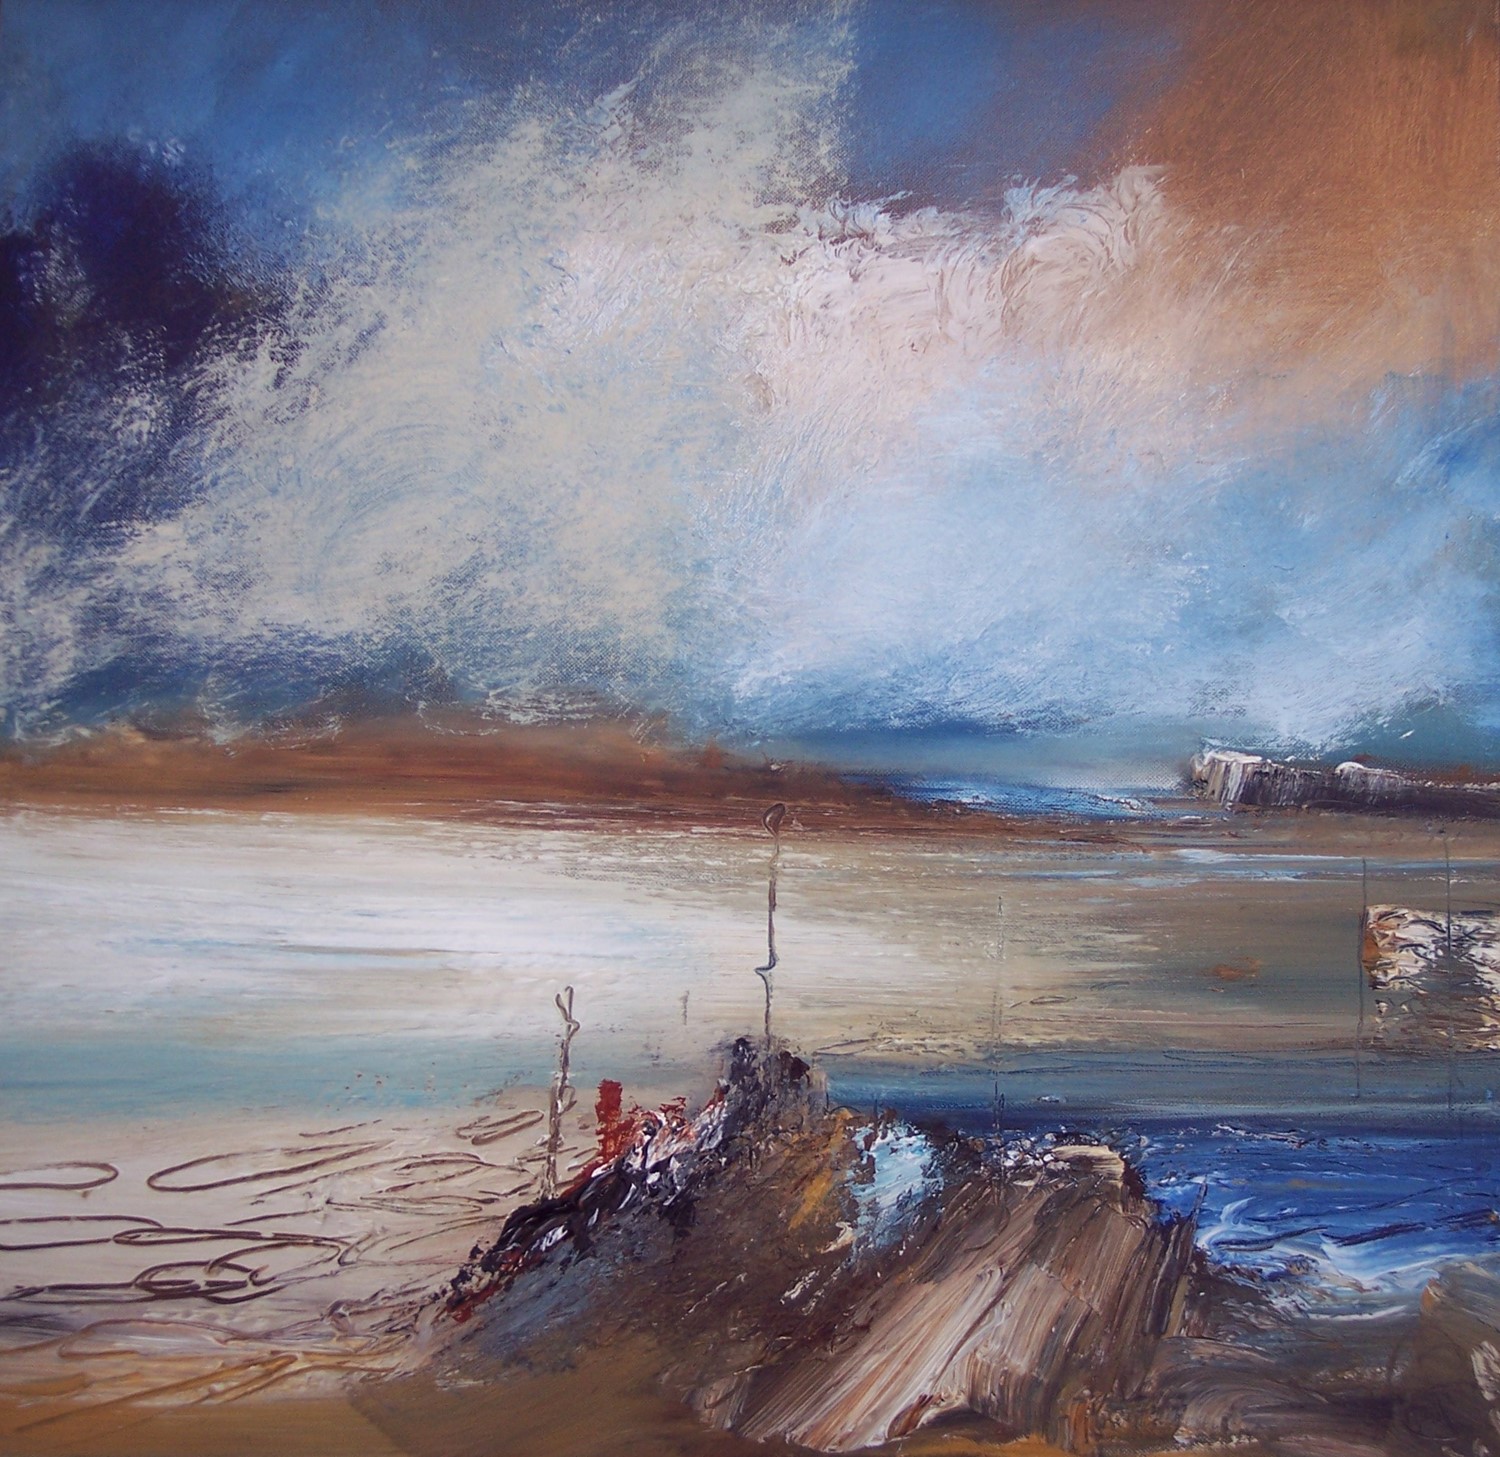 'Blowing a Gale' by artist Rosanne Barr